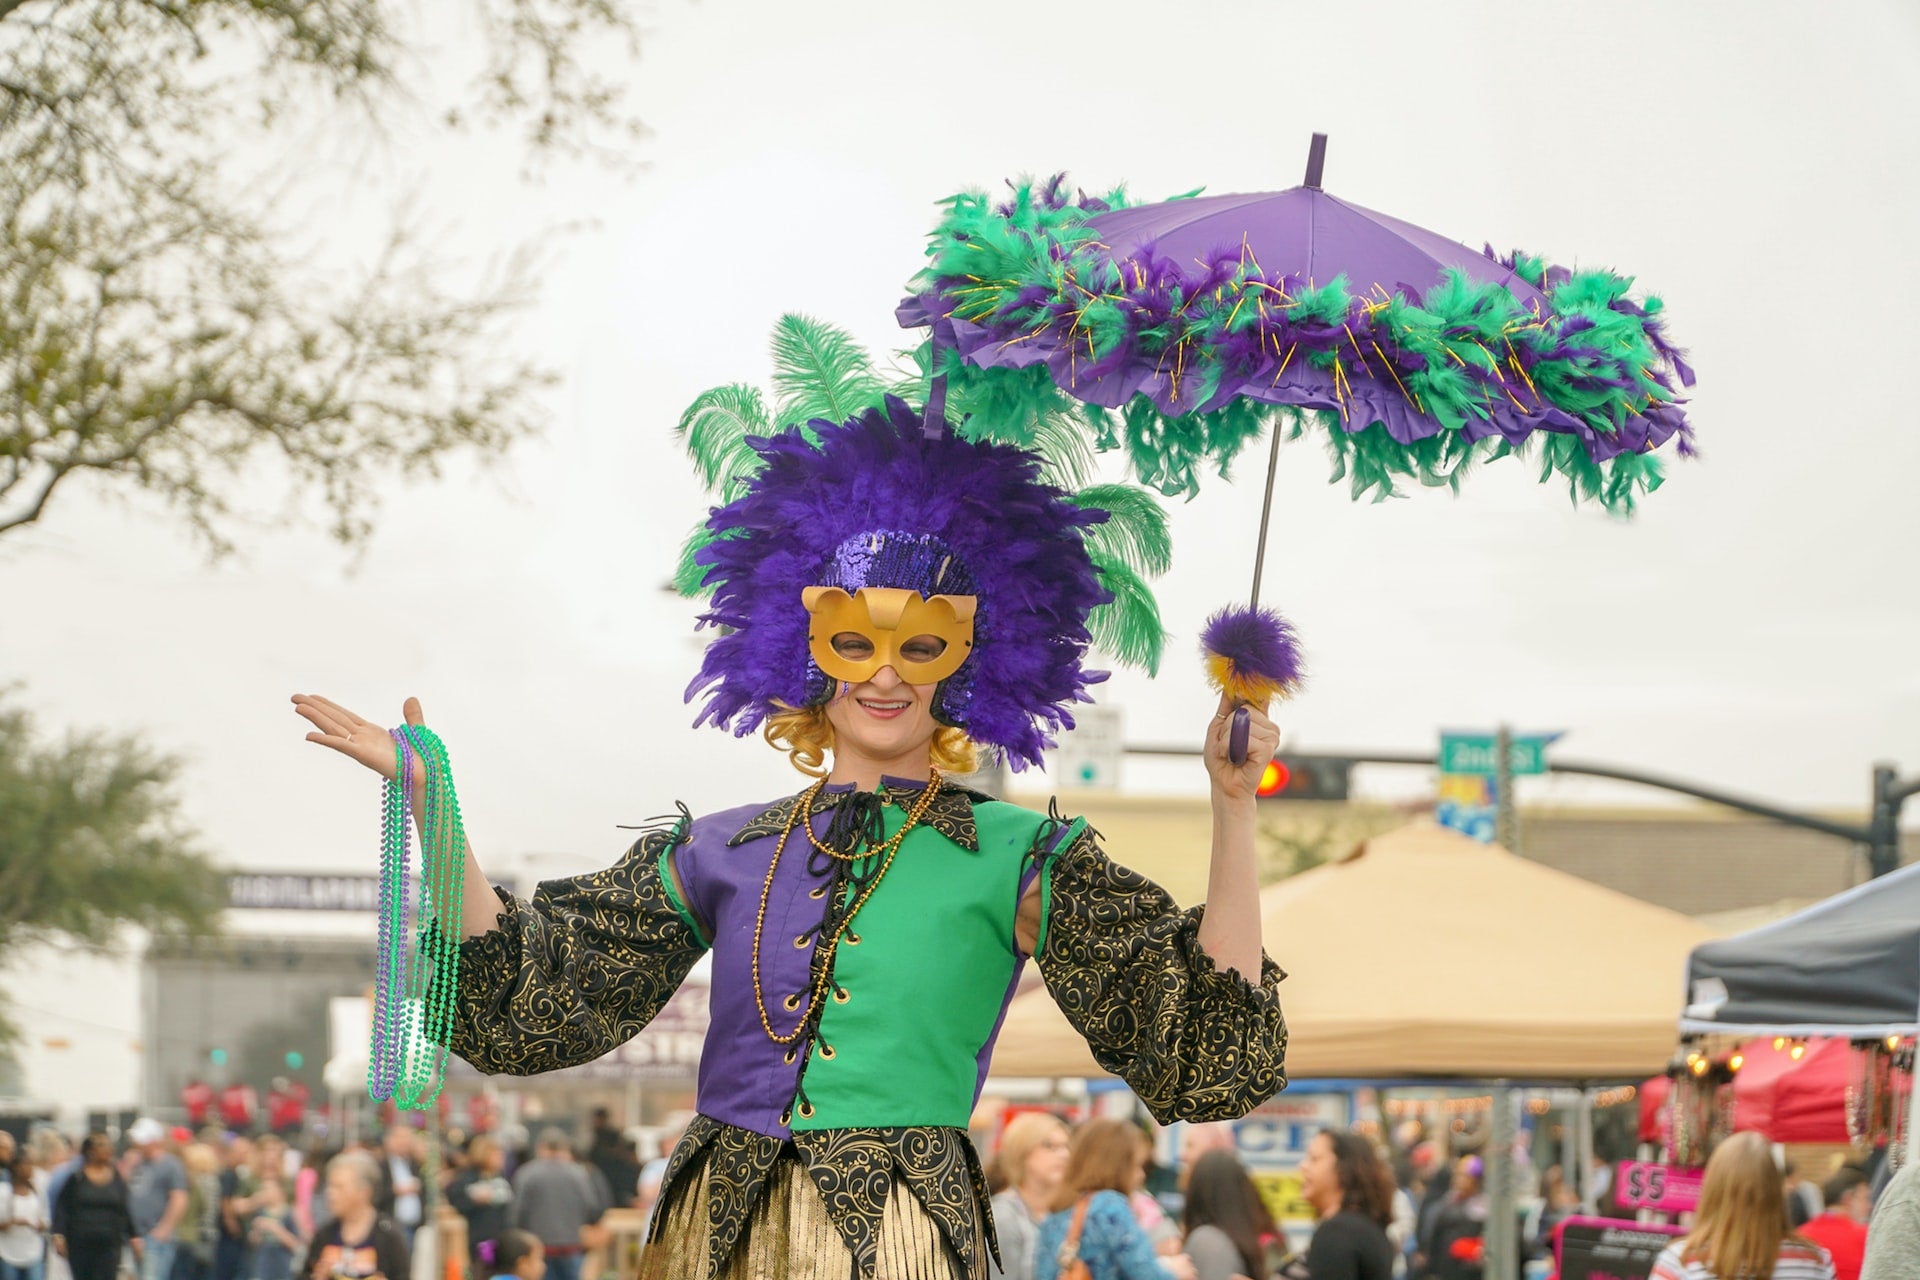 Lady dressed in Mardi Gras costume with a crowd behind her